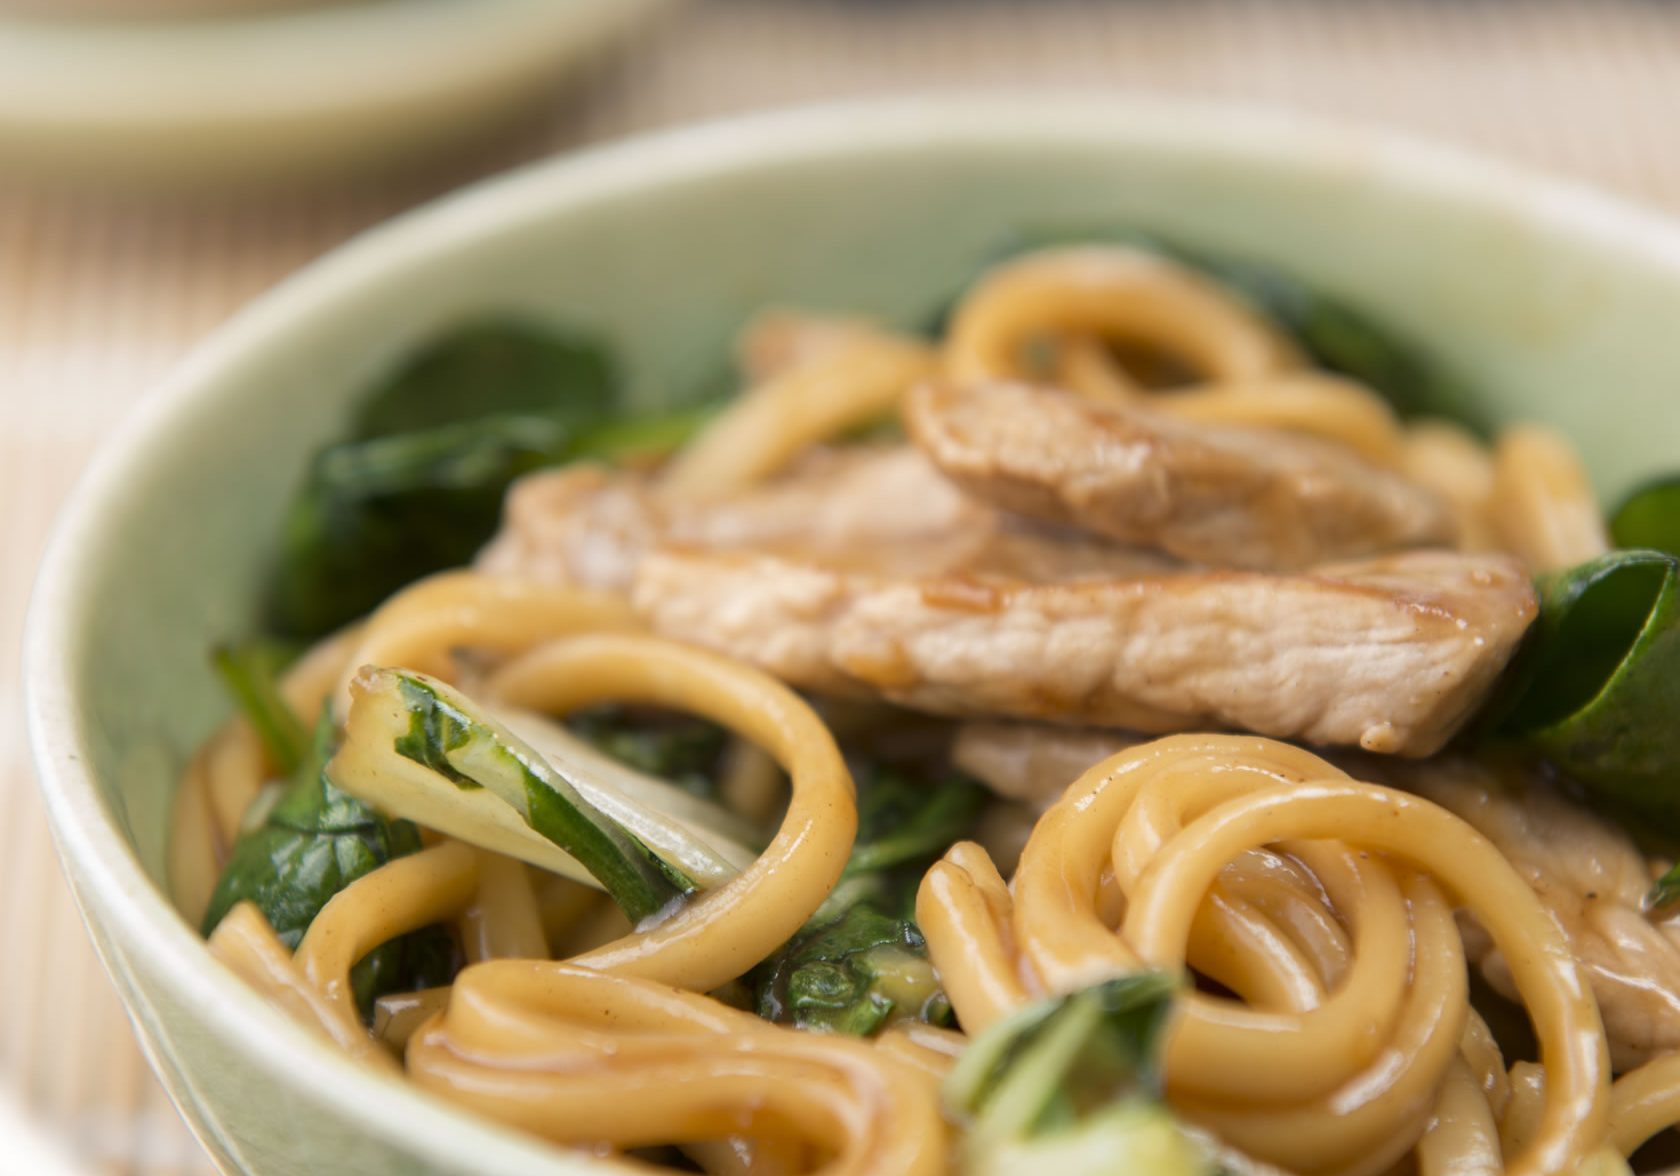 Pork in Star Anise Sauce with Greens and Udon Noodles